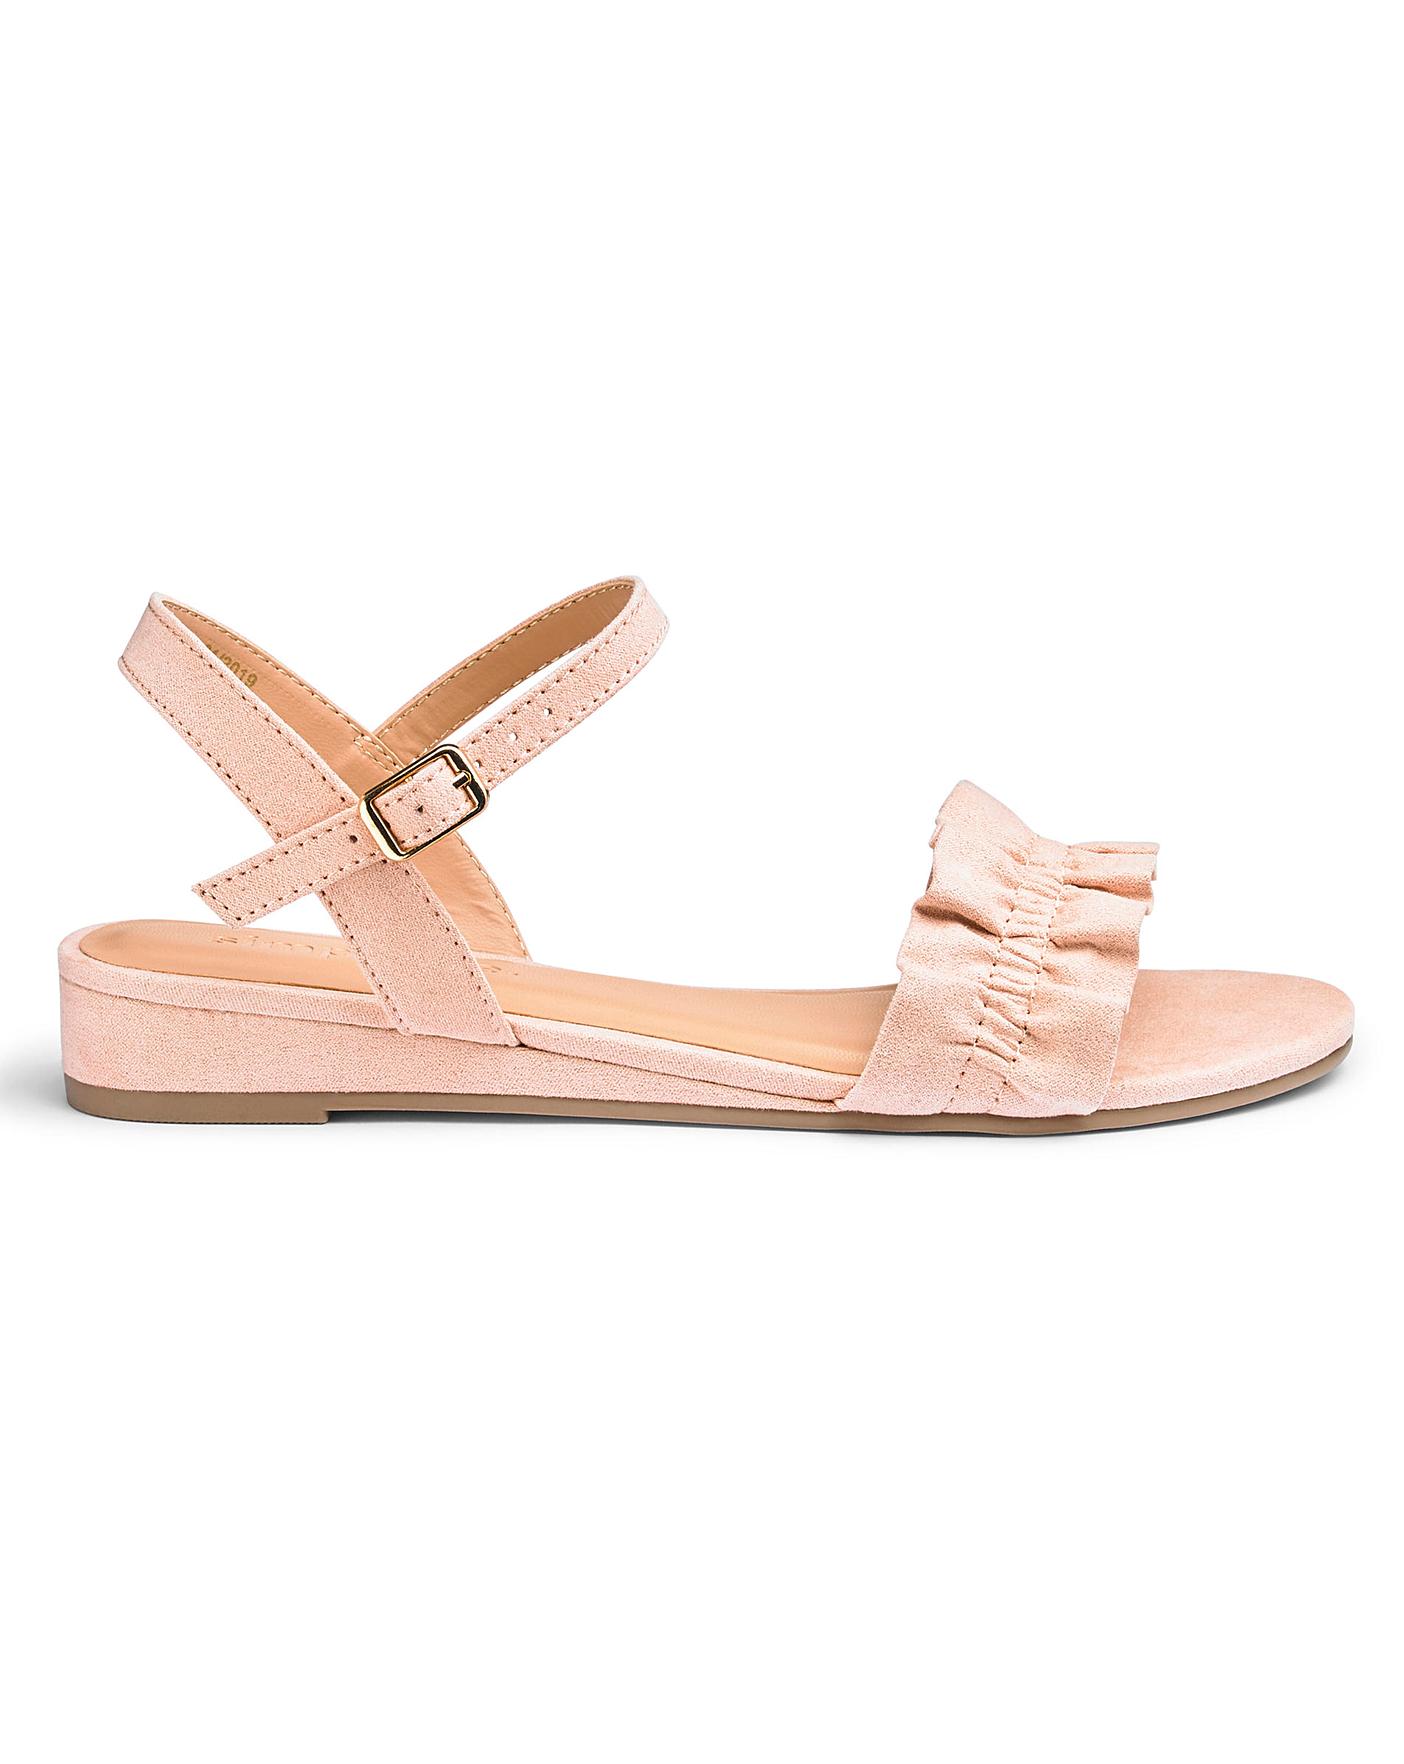 extra wide width wedge sandals